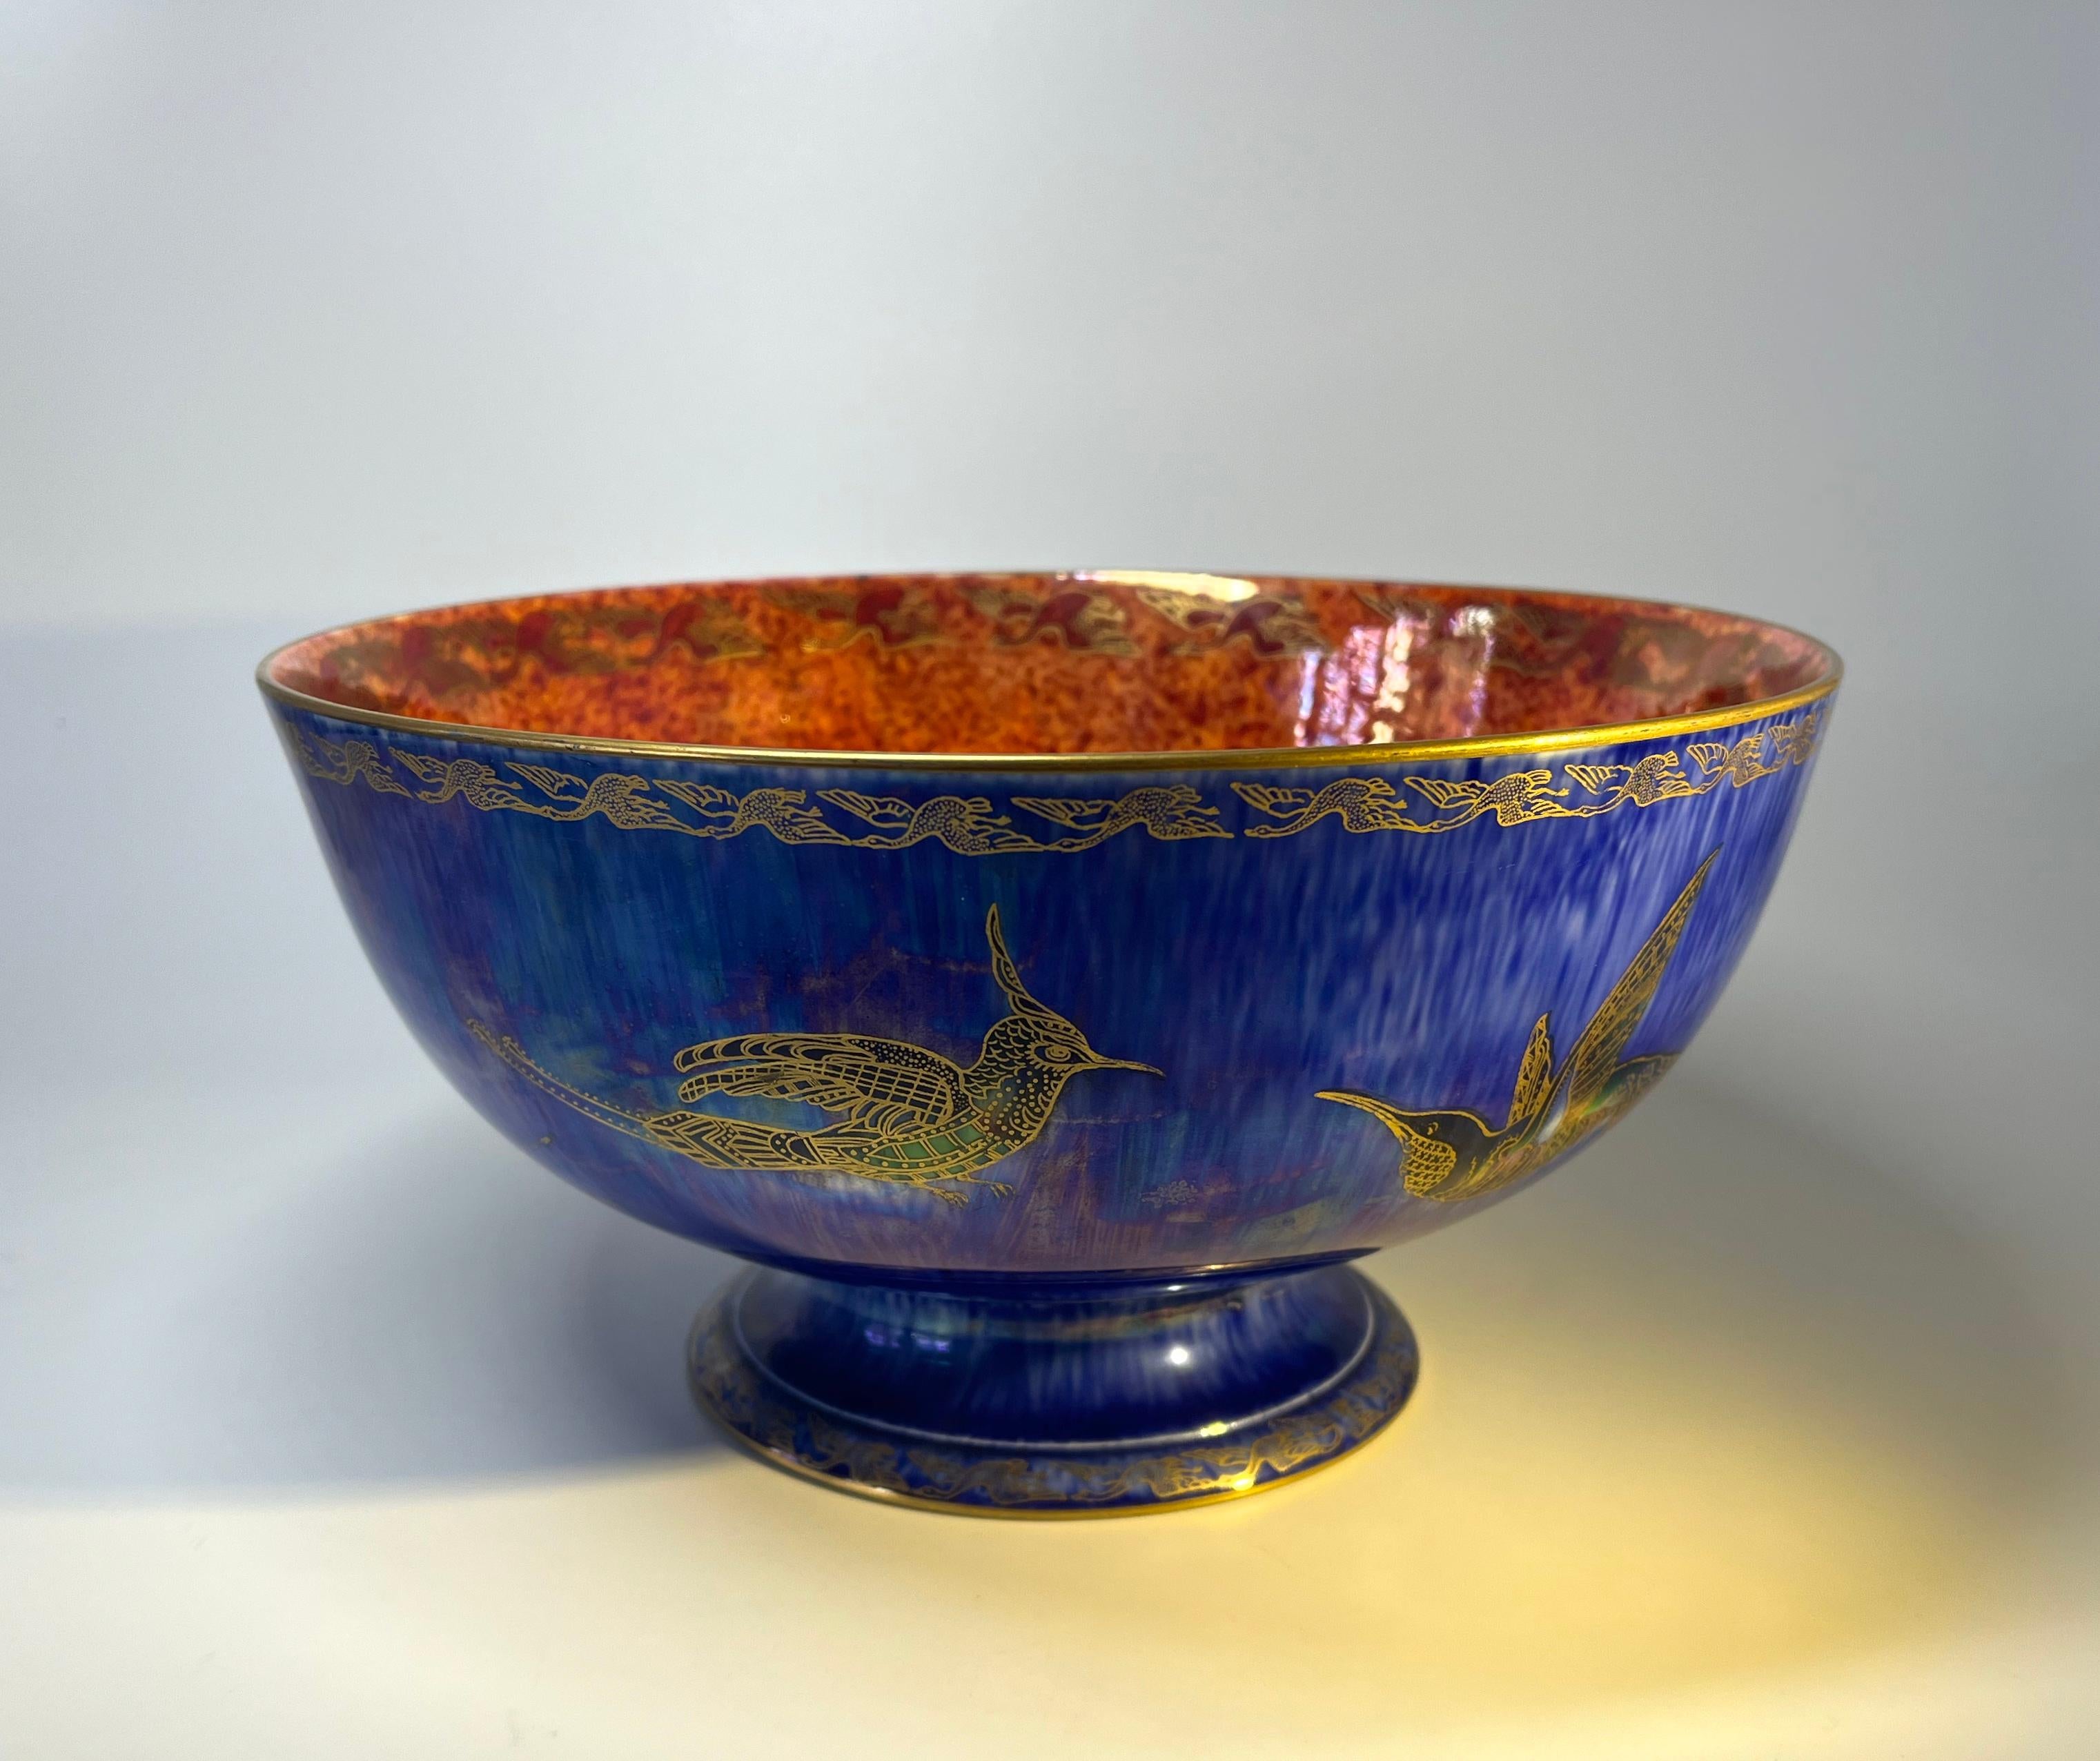 Monumental Wedgwood Ordinary Lustre Footed Bowl By Daisy Making-Jones In Good Condition For Sale In Rothley, Leicestershire